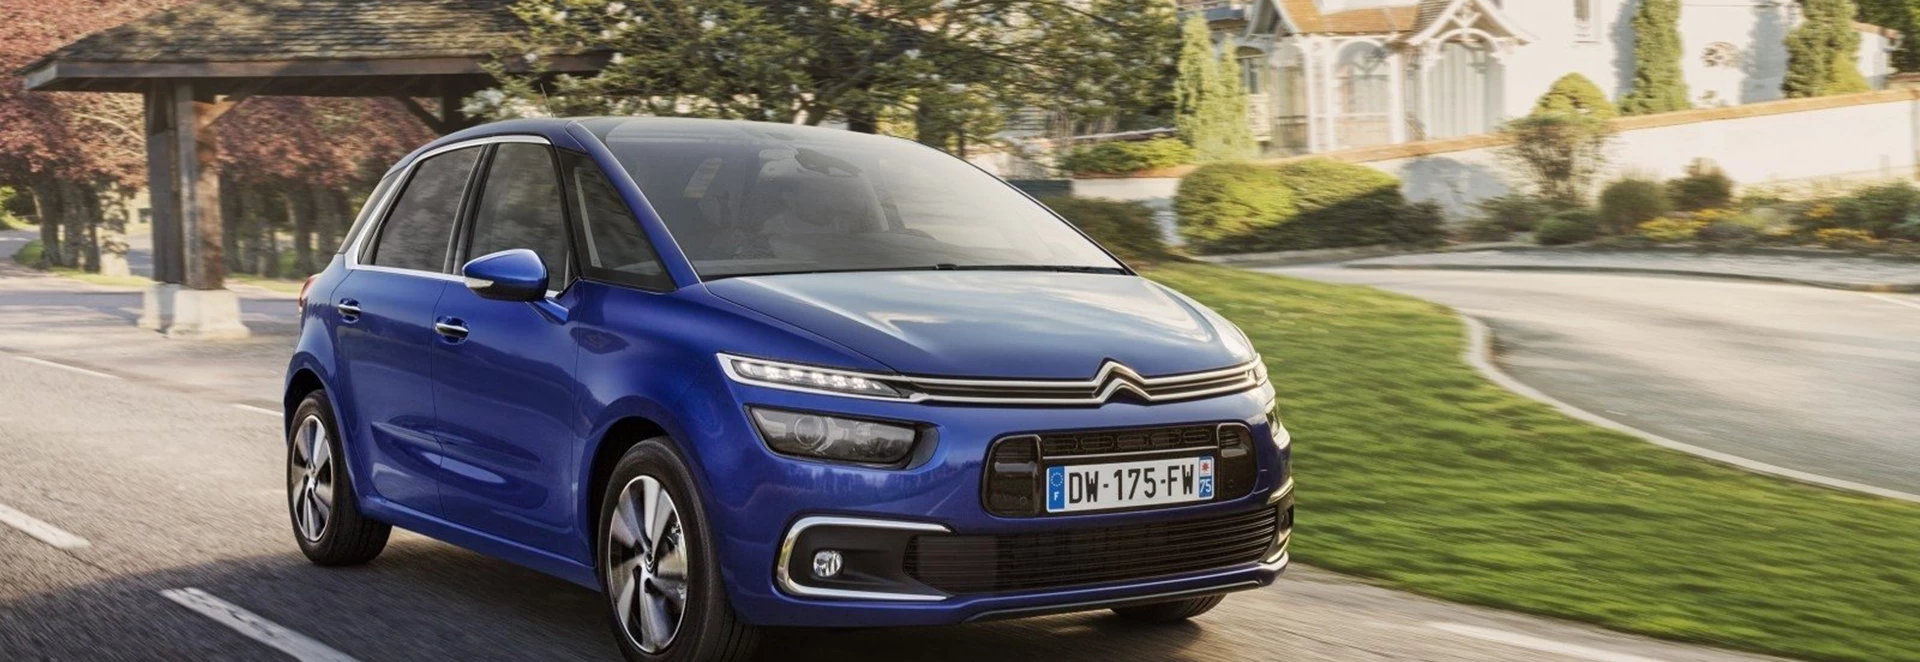 Pricing for updated Citroen C4 Picasso and Grand C4 Picasso confirmed